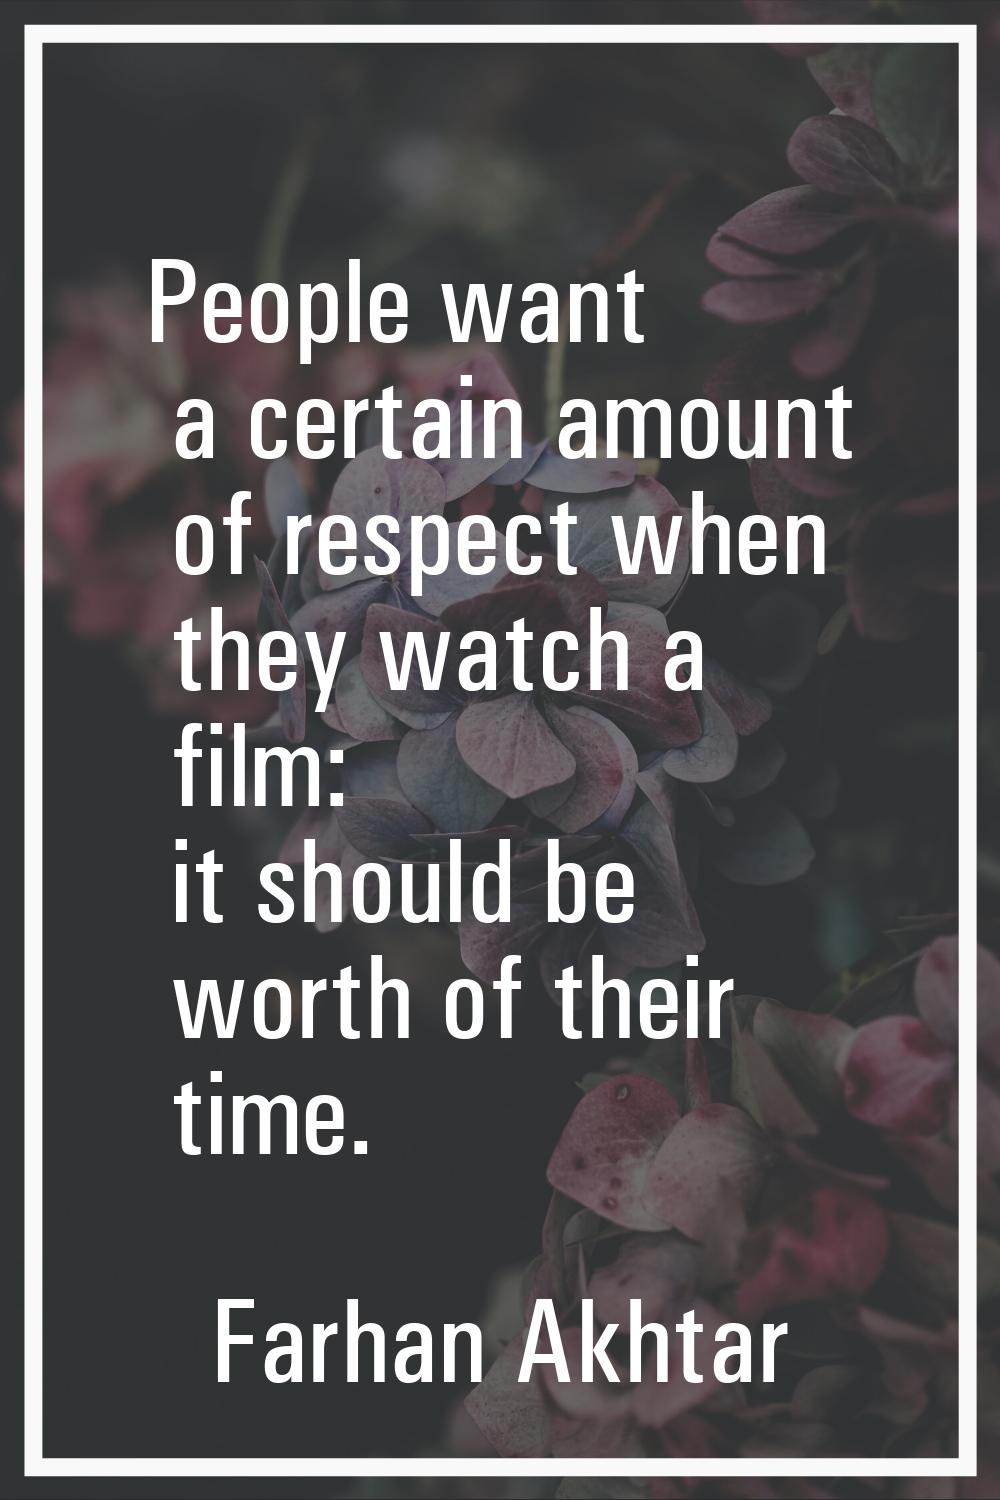 People want a certain amount of respect when they watch a film: it should be worth of their time.